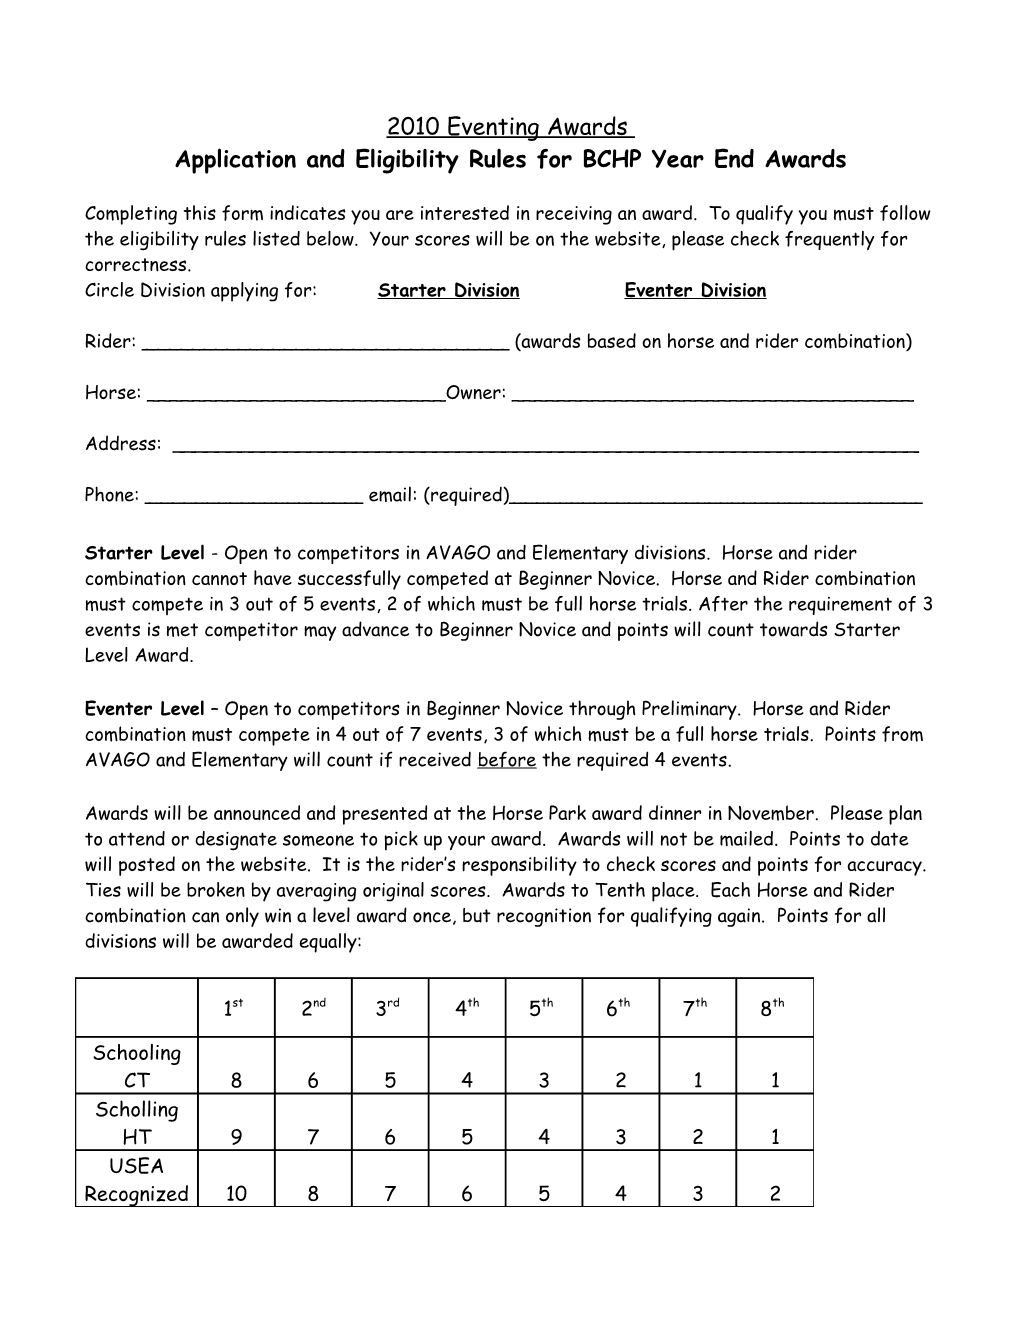 Application and Eligibility Rules for BCHP Year End Awards